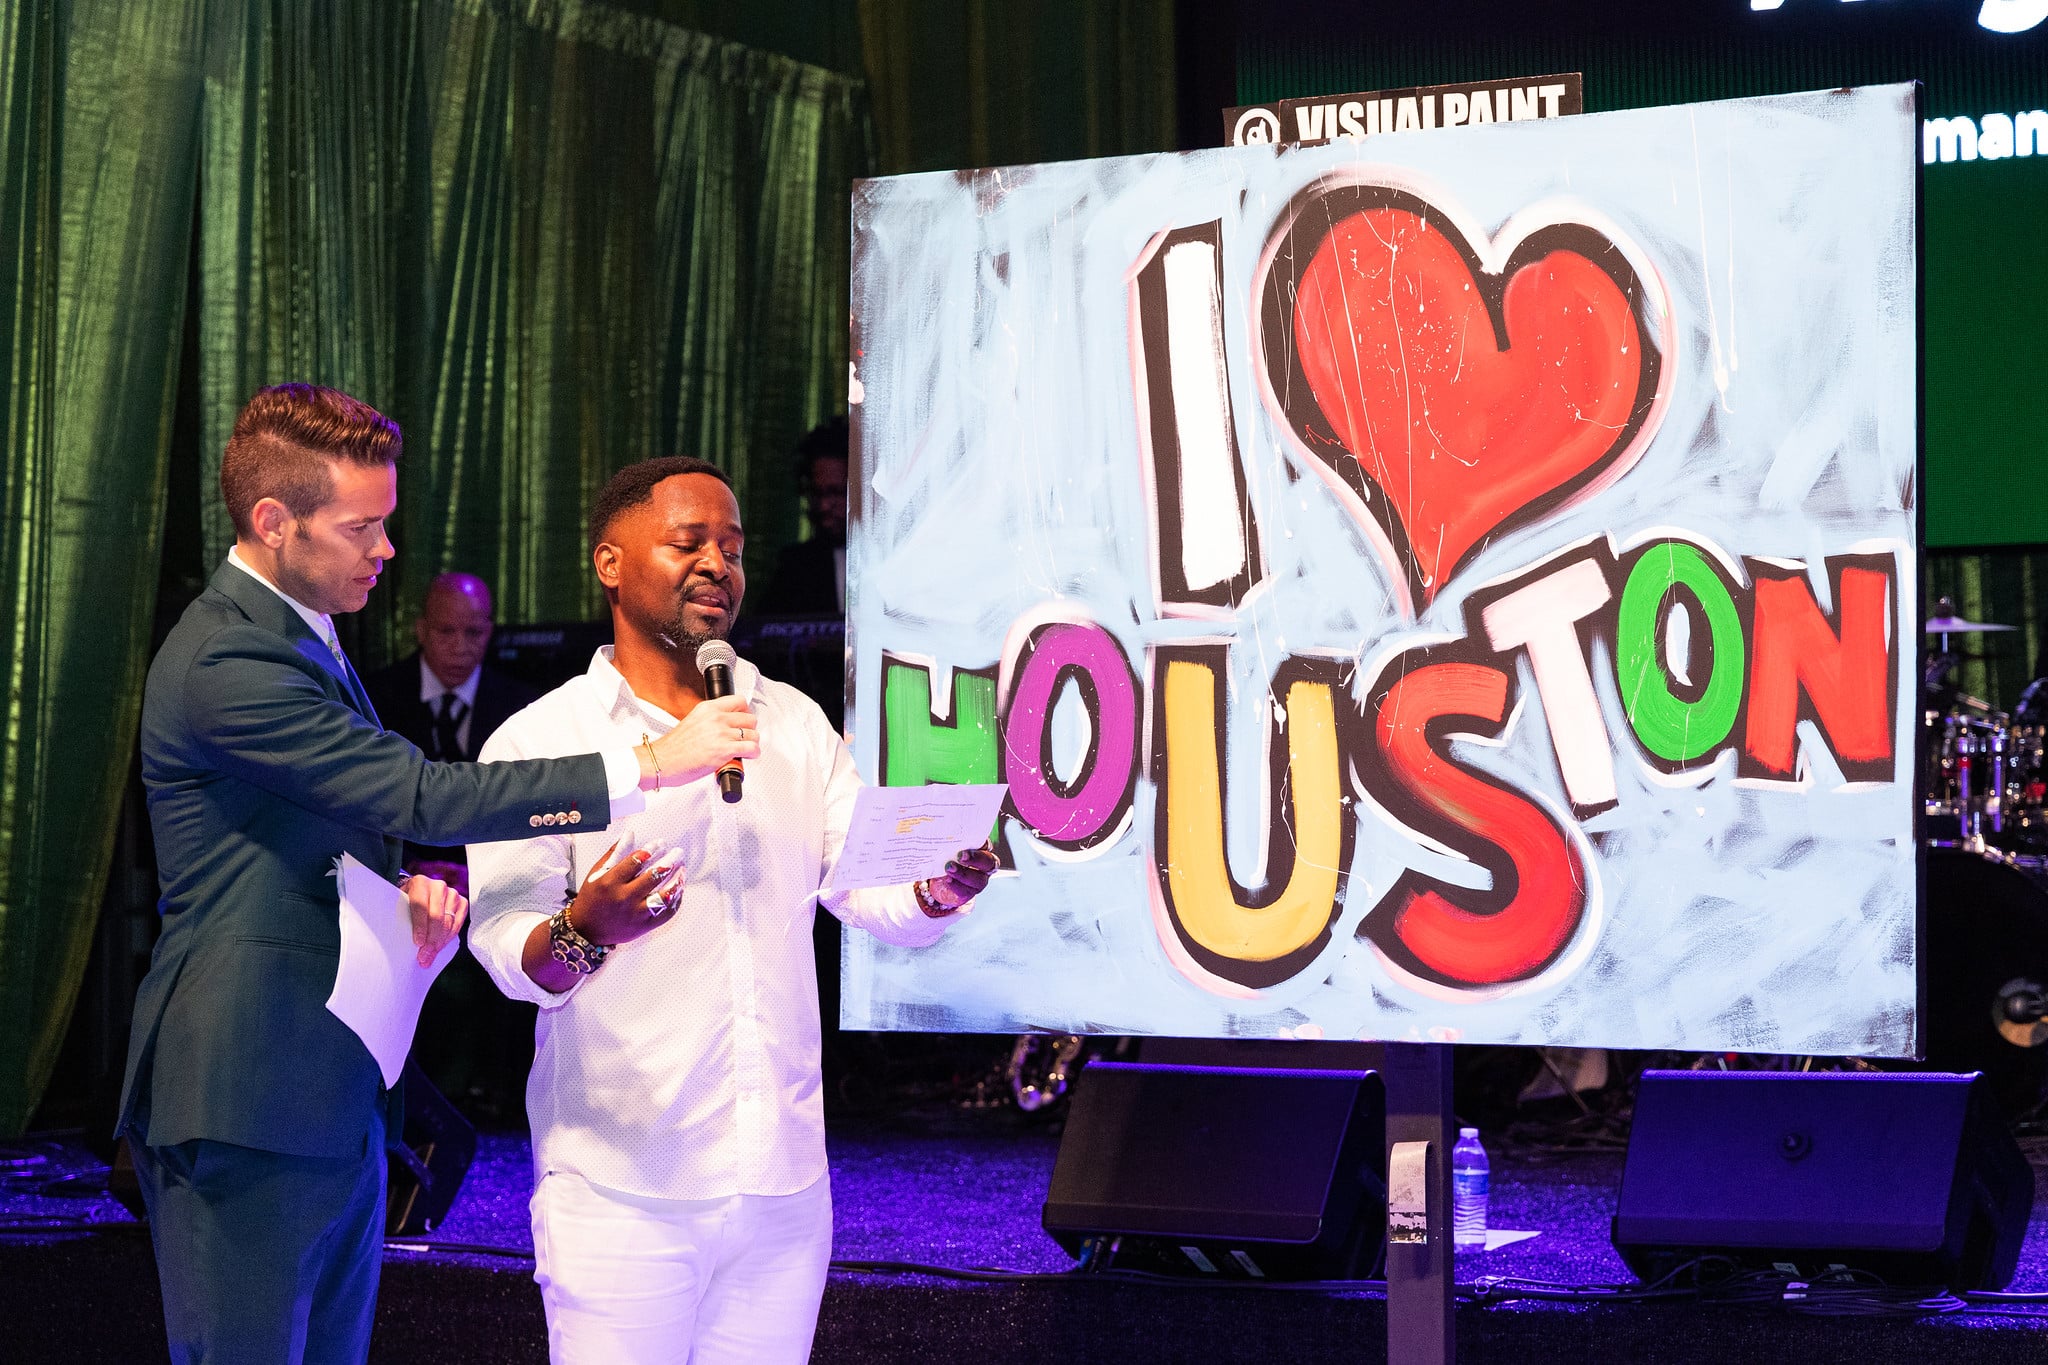 From L-R: Derrick Shore, Ange Hillz  Gala on the Green® at Discovery Green in downtown Houston. February 23, 2023. Photo: Lawrence Elizabeth Knox